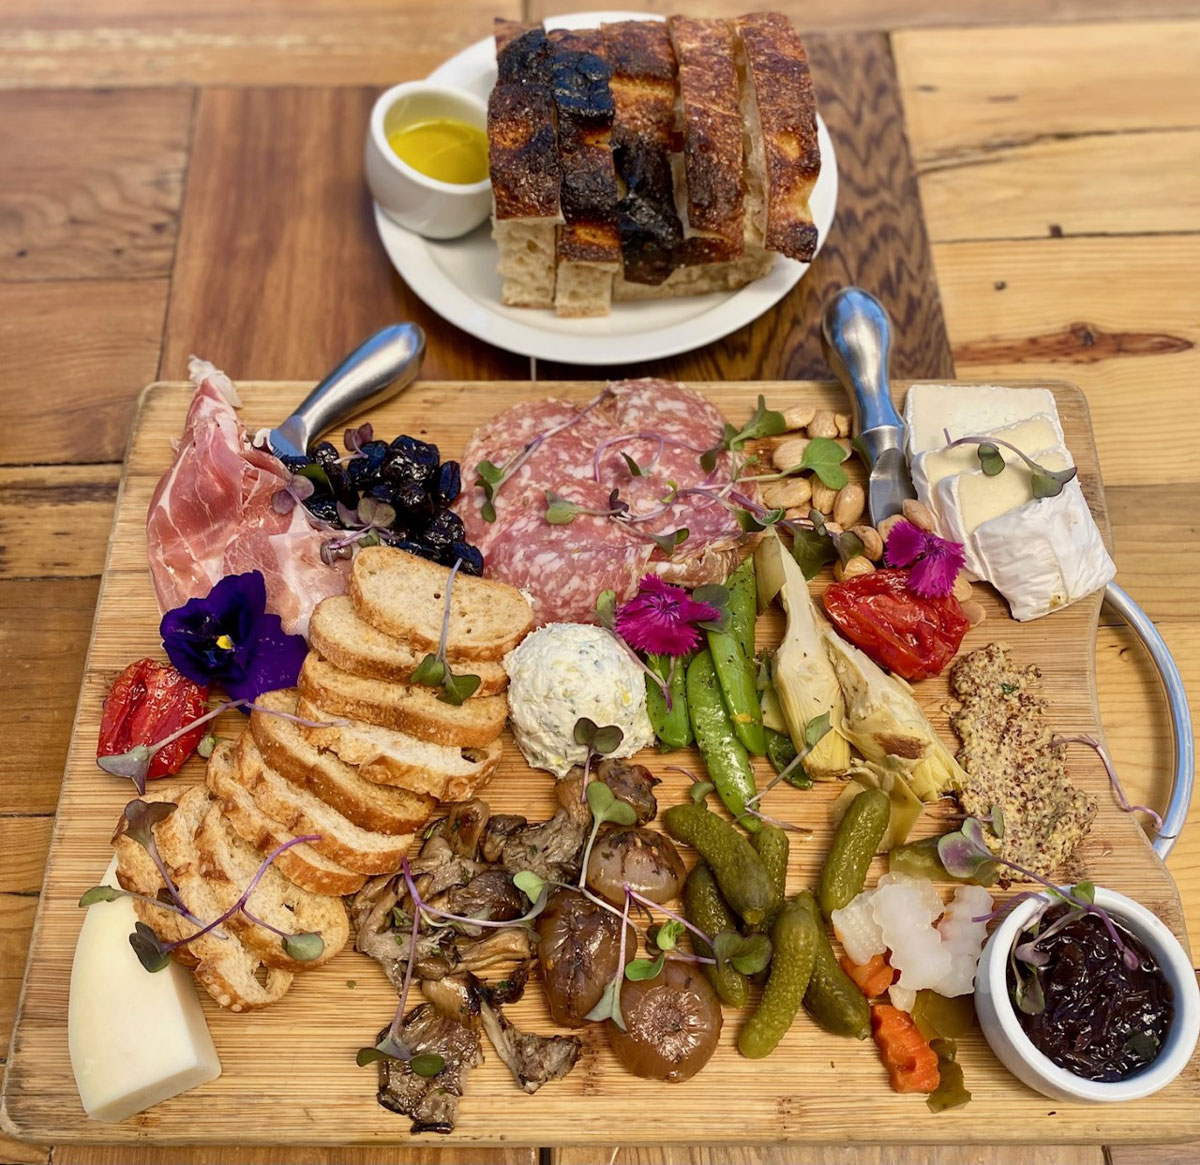 Niner Wine Estates' charcuterie board with meats, cheeses, jam and heavenly focaccia bread. Photo by Rico Cassoni